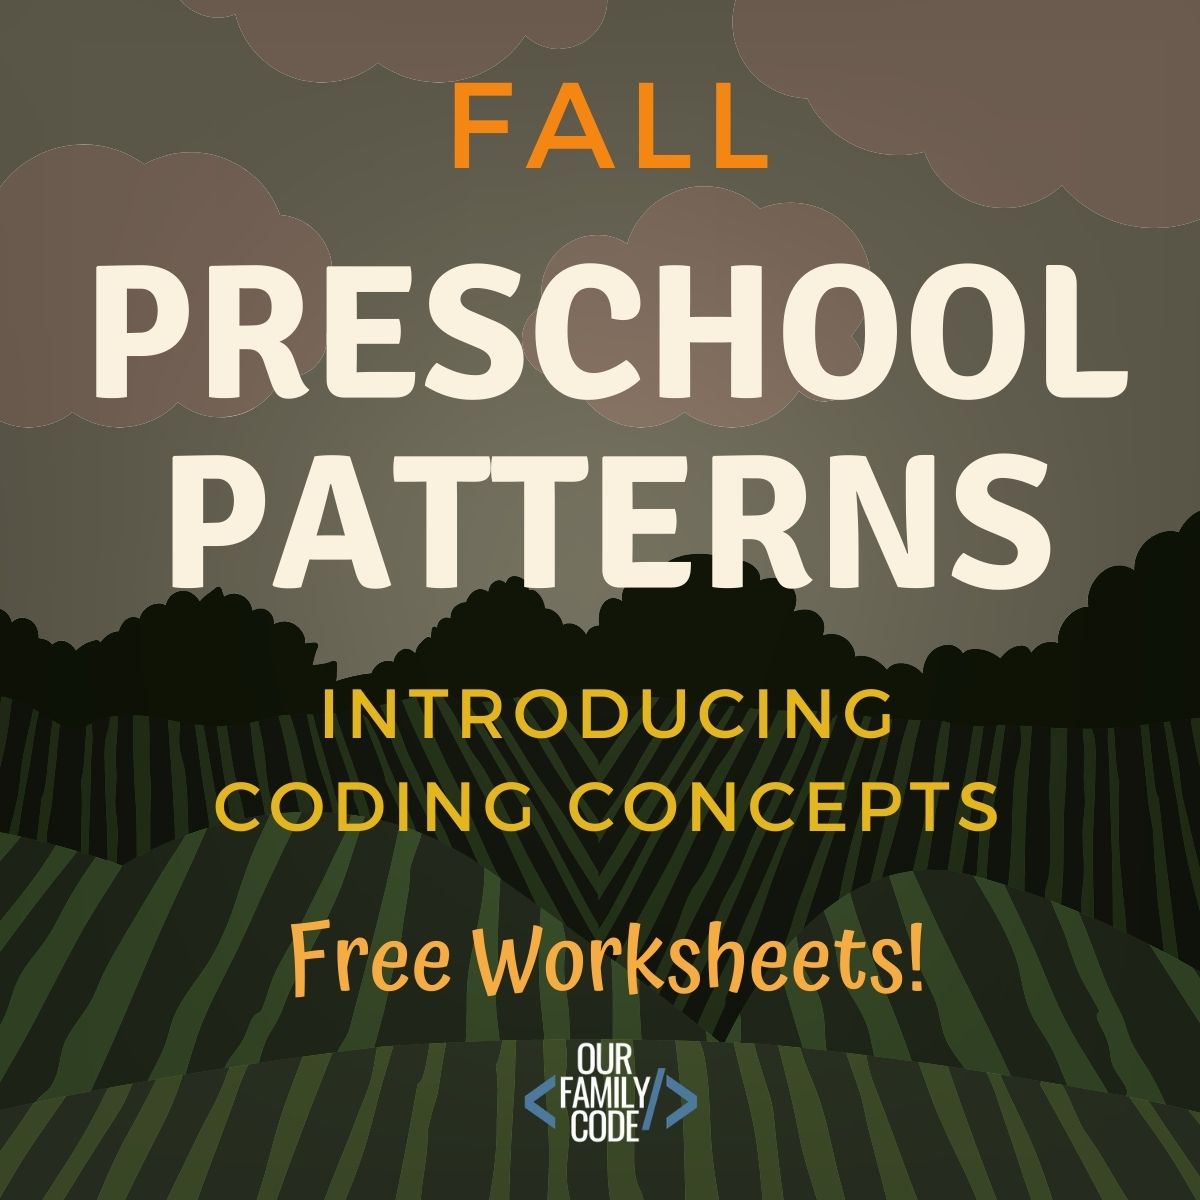 Teach your preschooler how to think like a computer programmer with these preschool pattern worksheets that introduce coding concepts. #teachkidstocode #preschoolmathactivities #preschoolcoding #unpluggedcoding #hourofcode